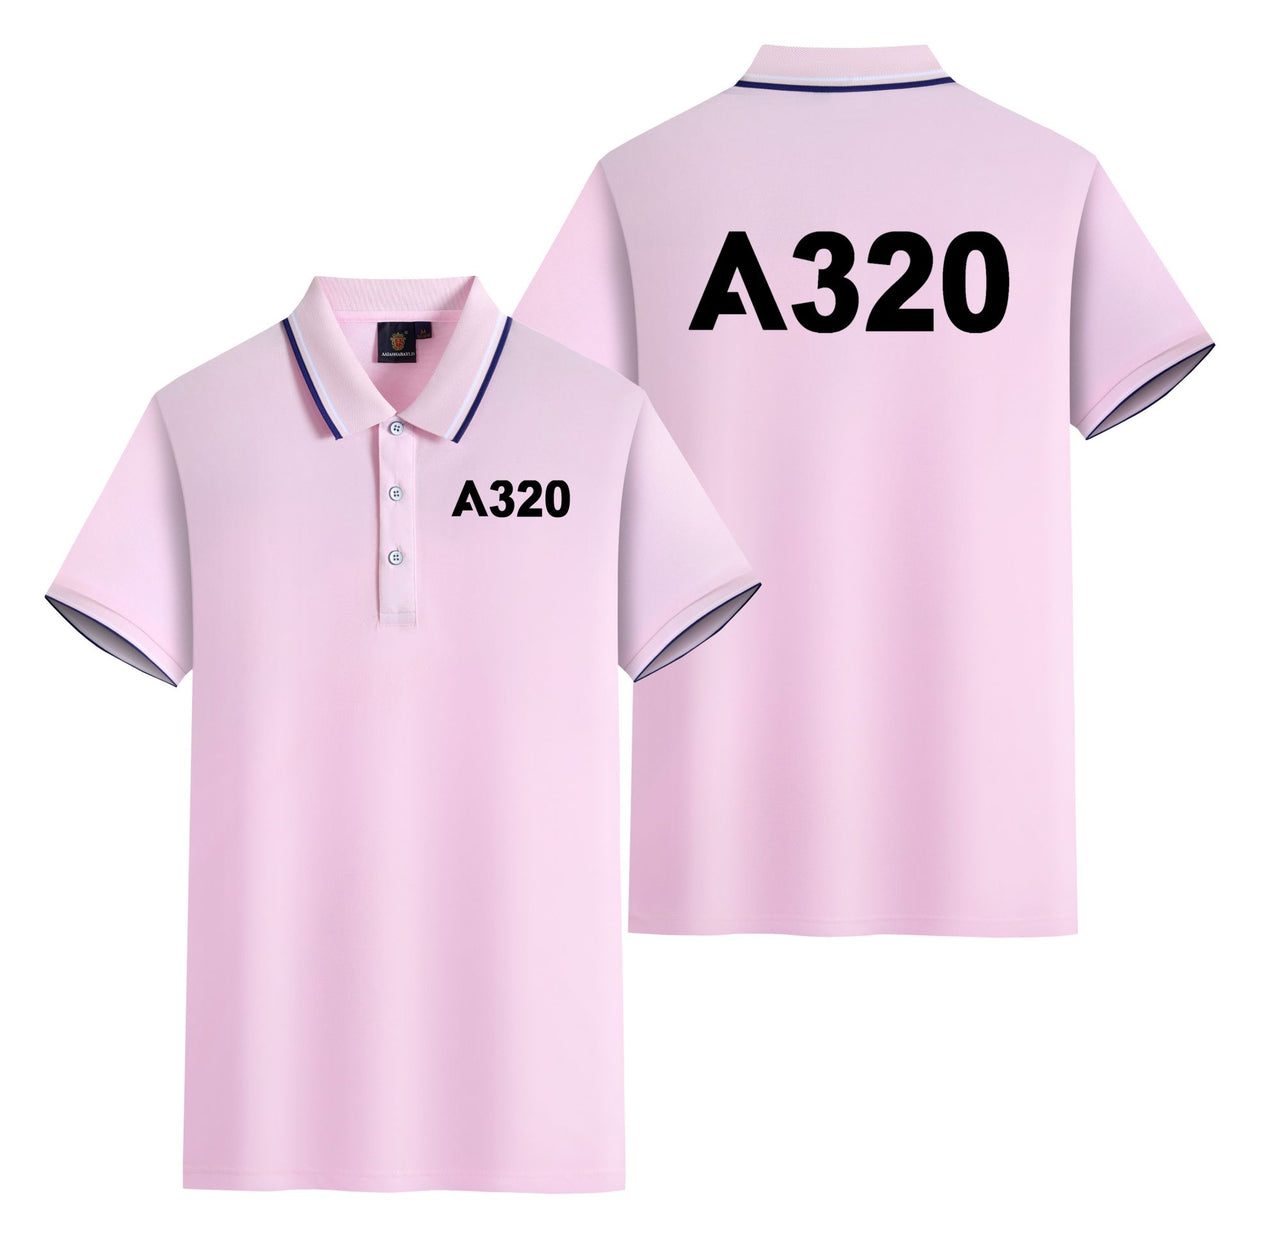 A320 Flat Text Designed Stylish Polo T-Shirts (Double-Side)